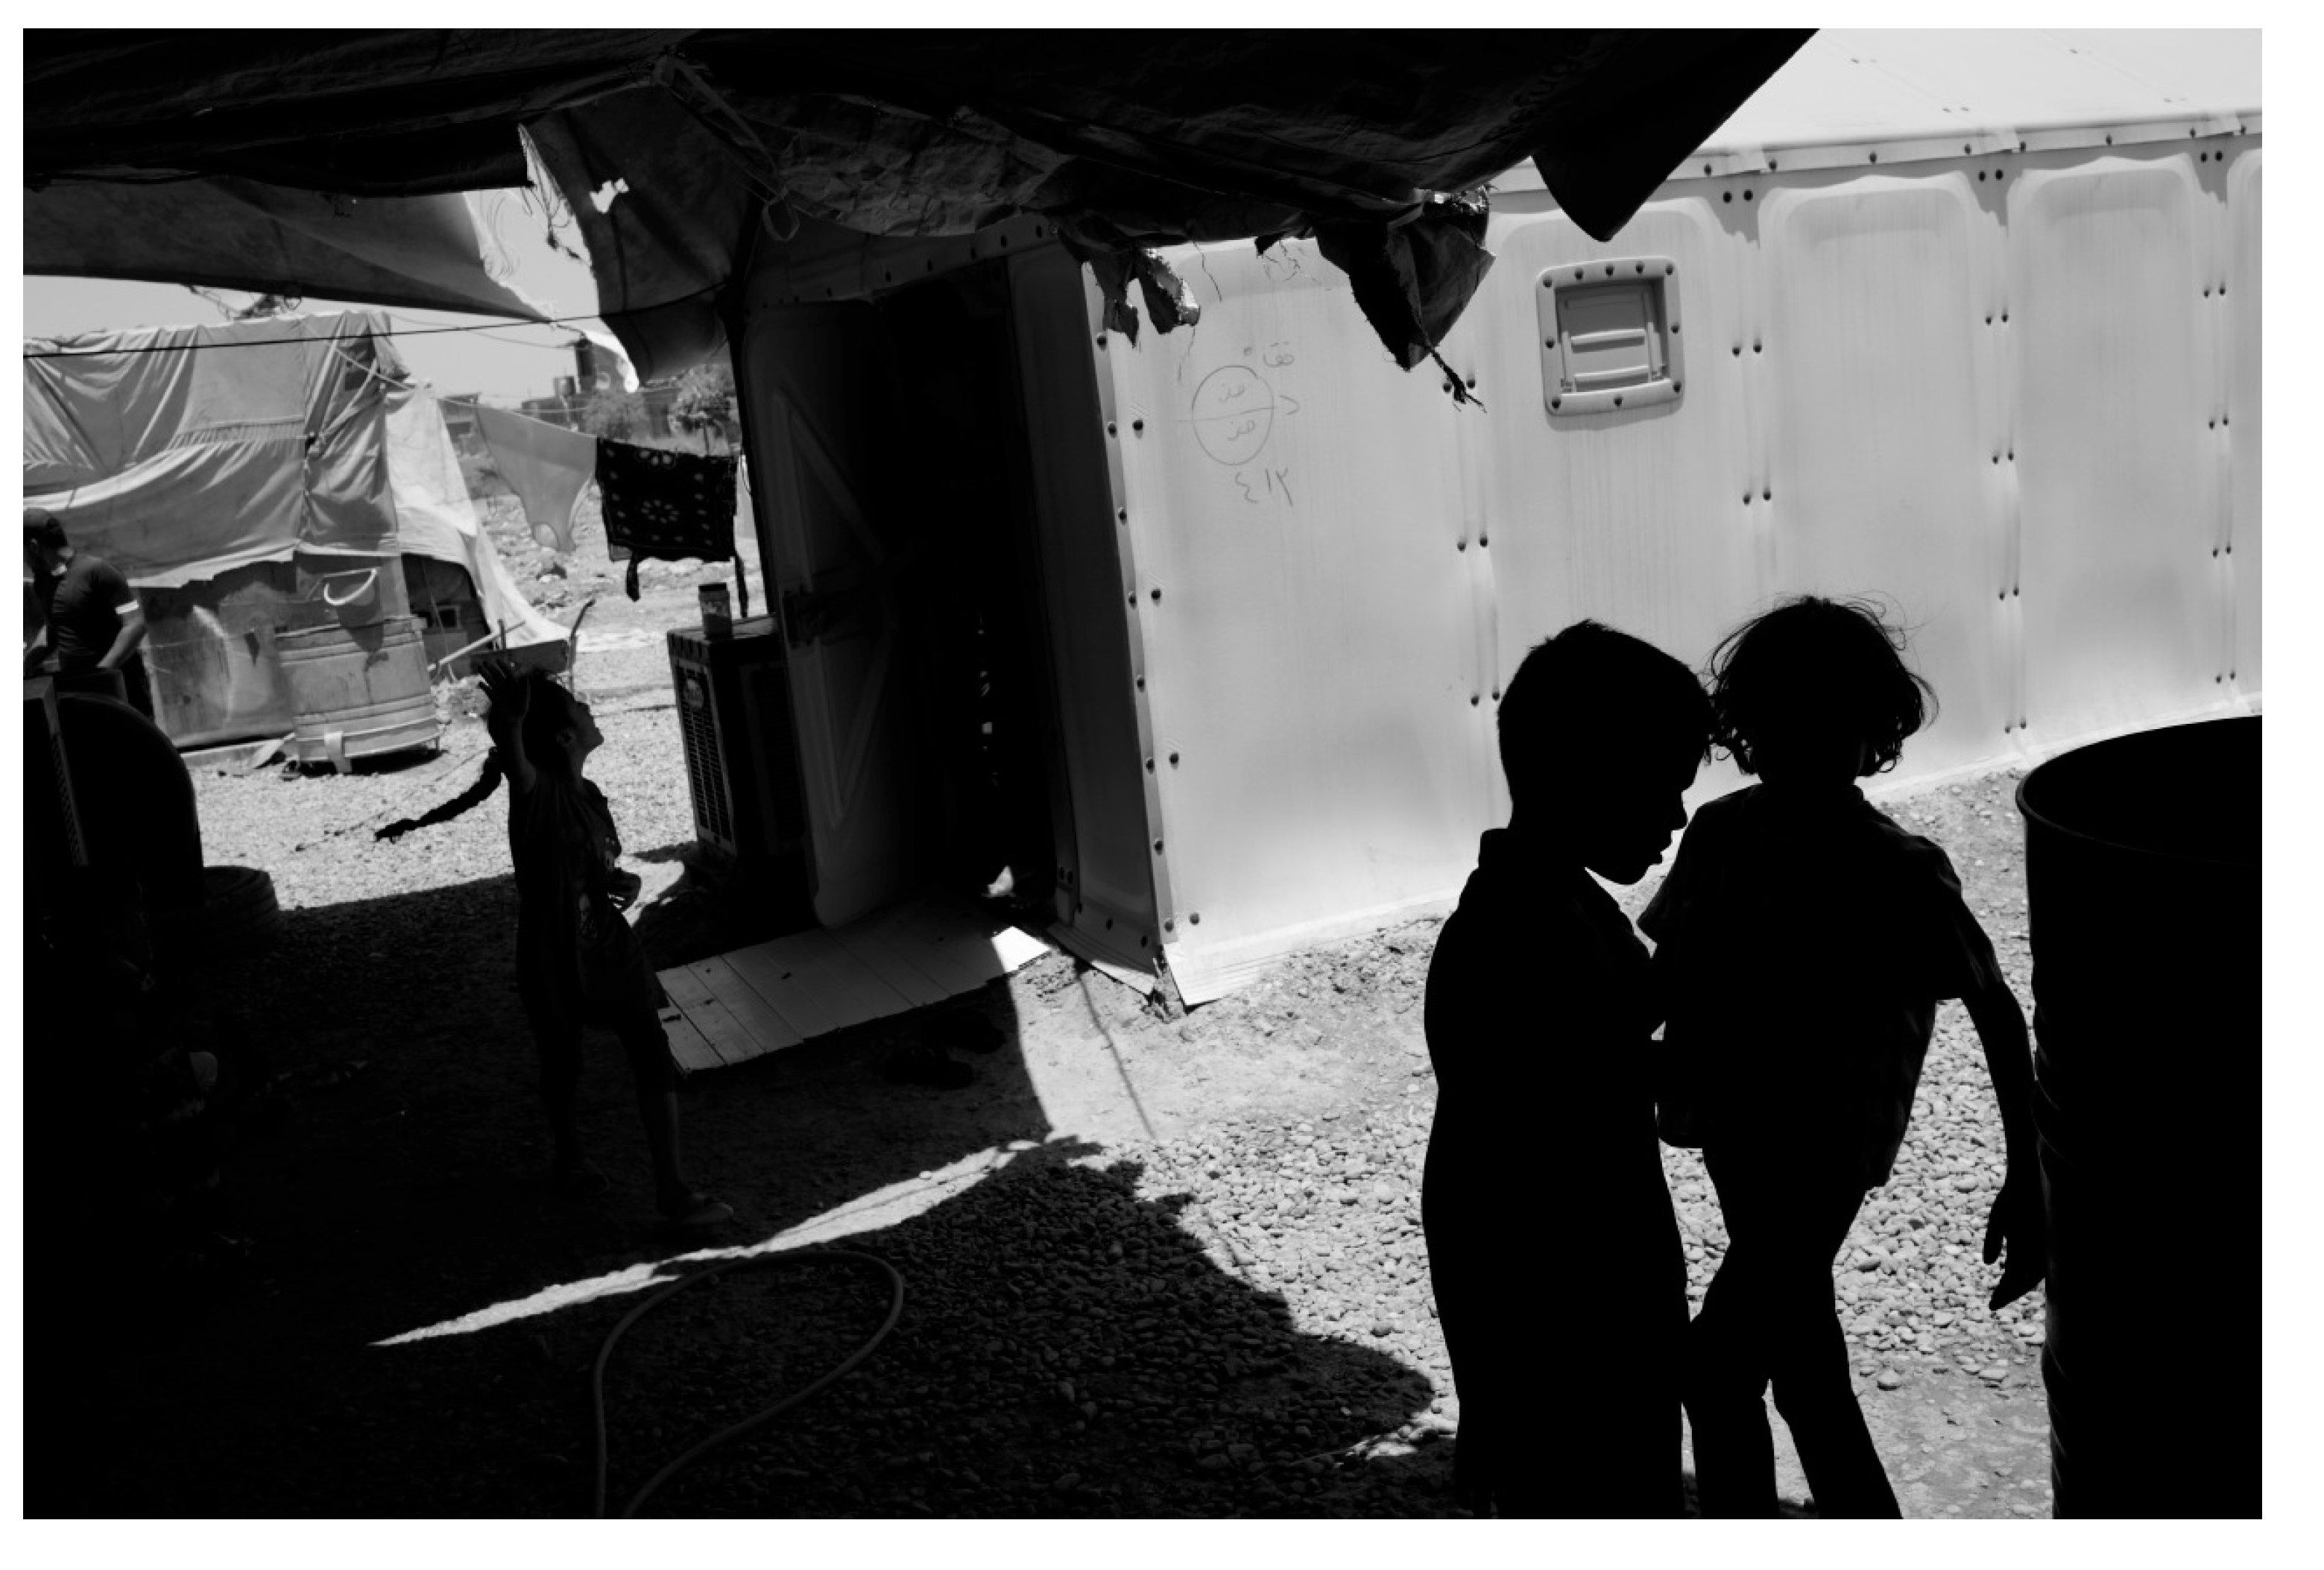 A photo of children in an IDP camp, taken for the Fractured Lands project. Image by Paolo Pellegrin. Iraq, 2016.